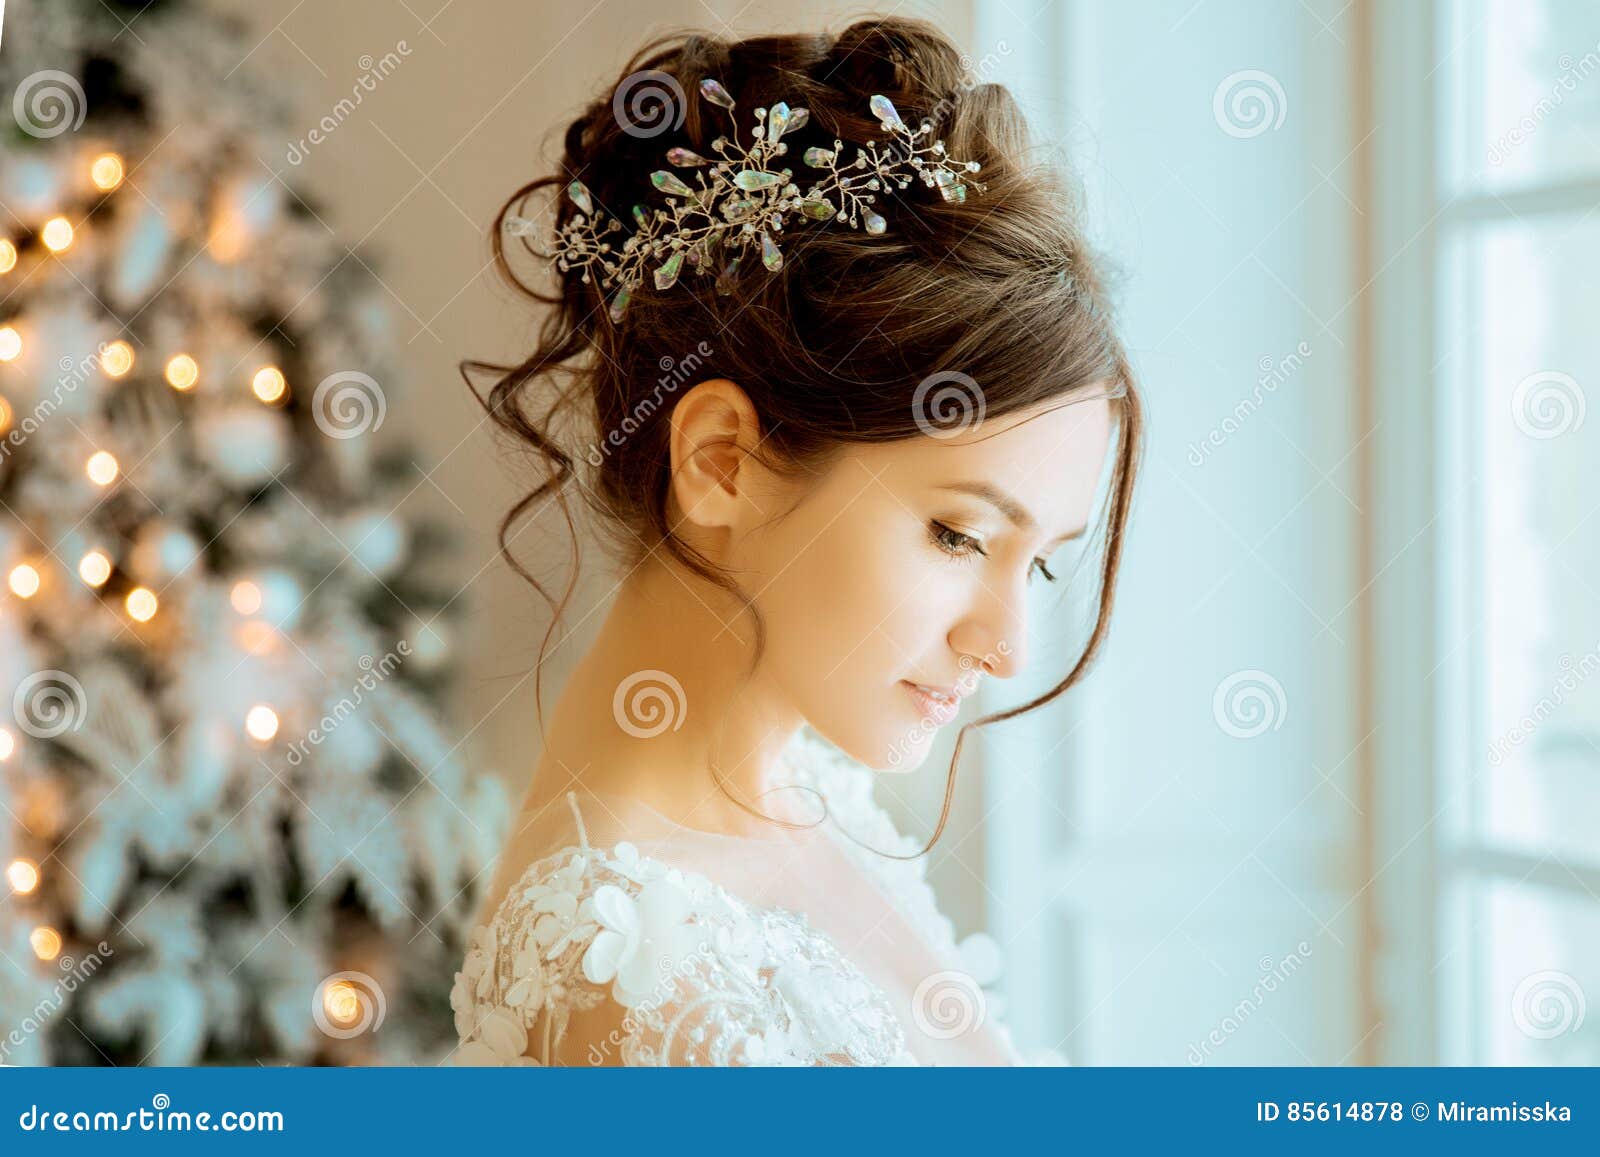 Bride Wedding The Bride In A Short Dress With Lace In The Crow Stock Photo Image Of Hairstyle Glamour 85614878